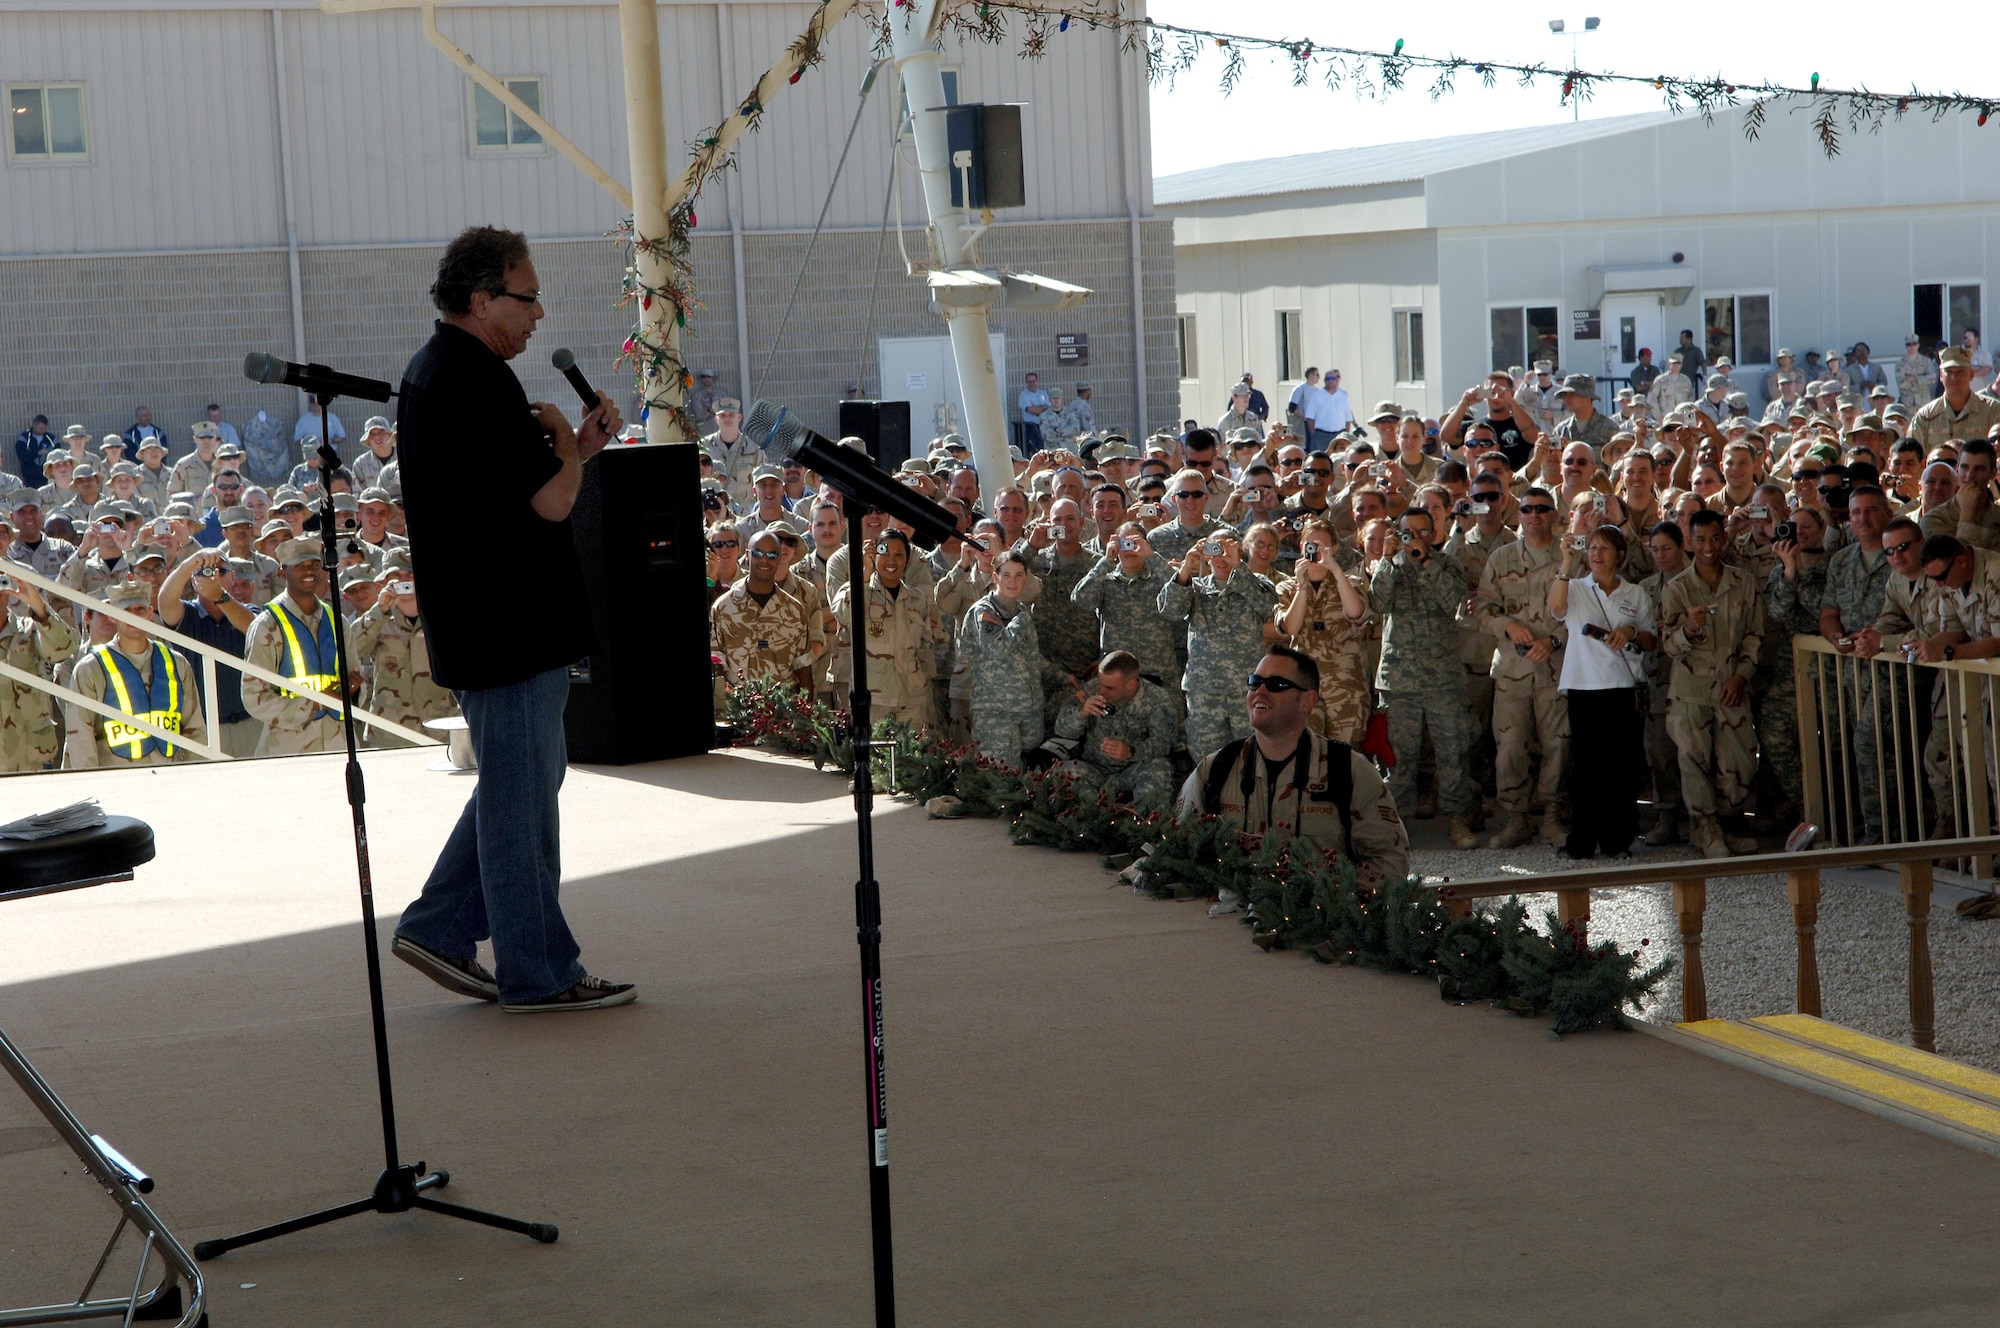 SOUTHWEST ASIA - Lewis Black, comedian and actor,  entertains deployed troops Dec. 17 at a base in Southwest Asia as part of the USO 2007 holiday tour. Other celebrities on the tour included Rachel Smith, Miss USA, Robin Williams, Kid Rock and Lance Armstrong. (Air Force Photo by Master Sergeant Greg Kunkle)